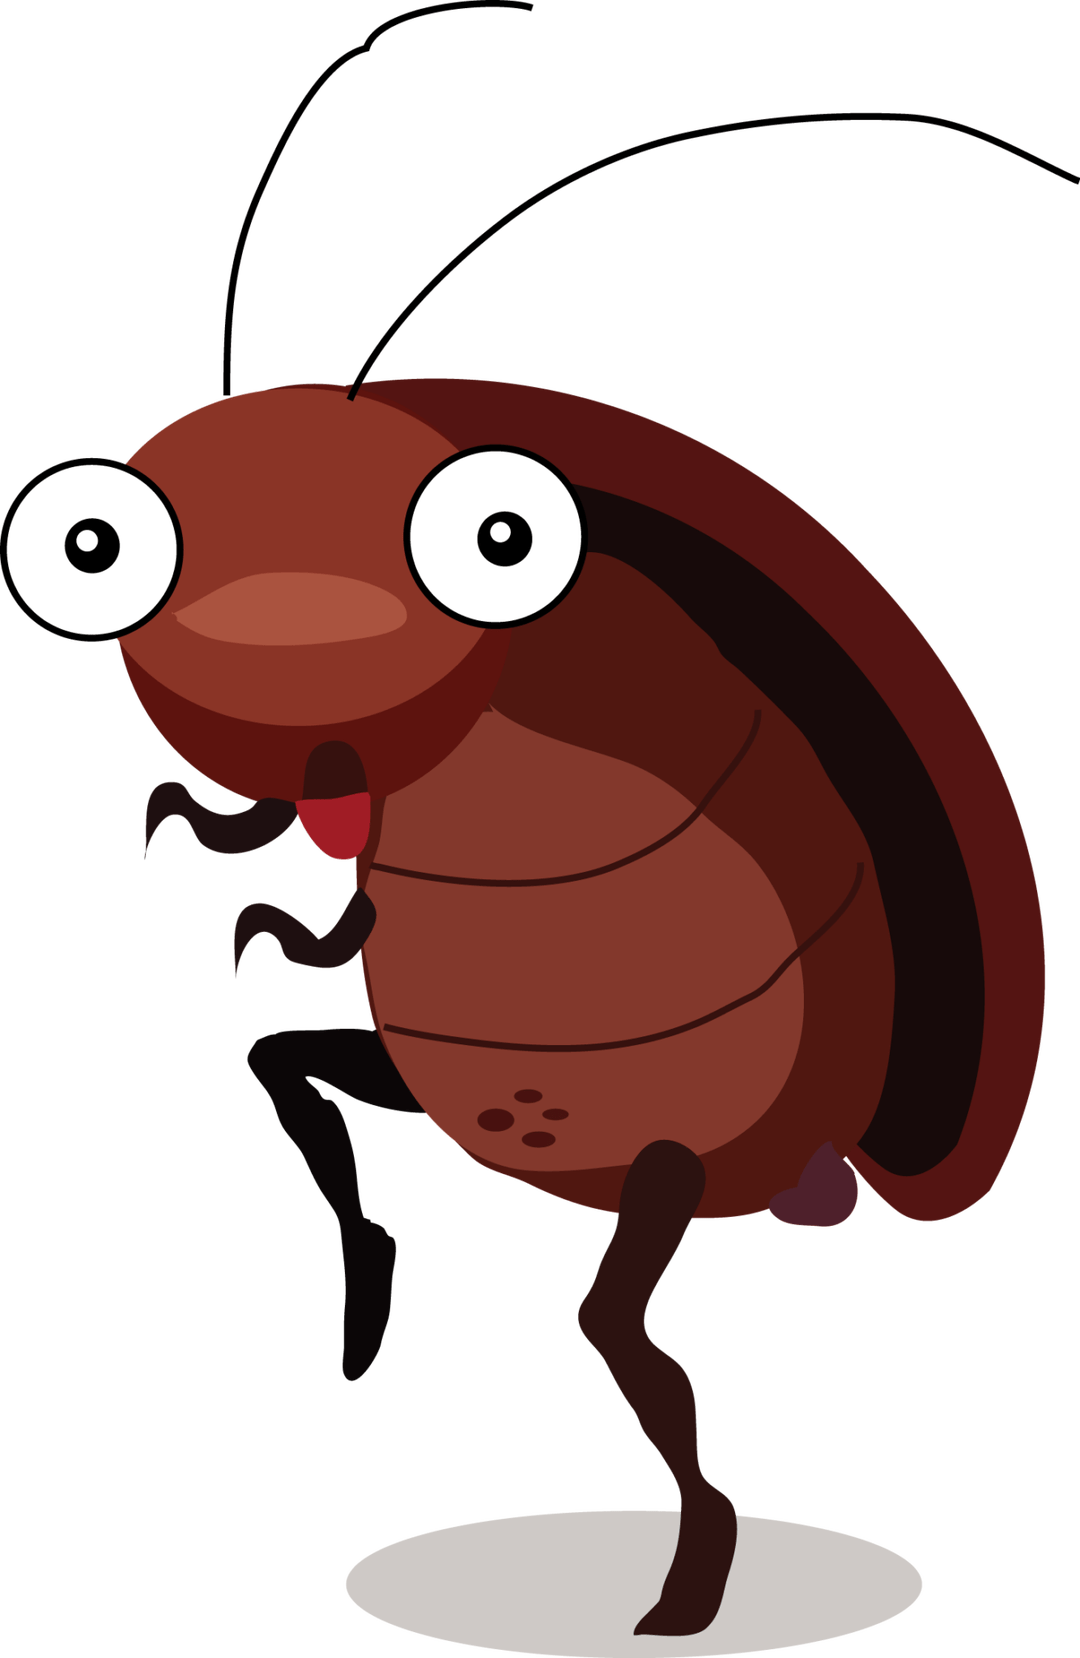 insect clipart garden creature